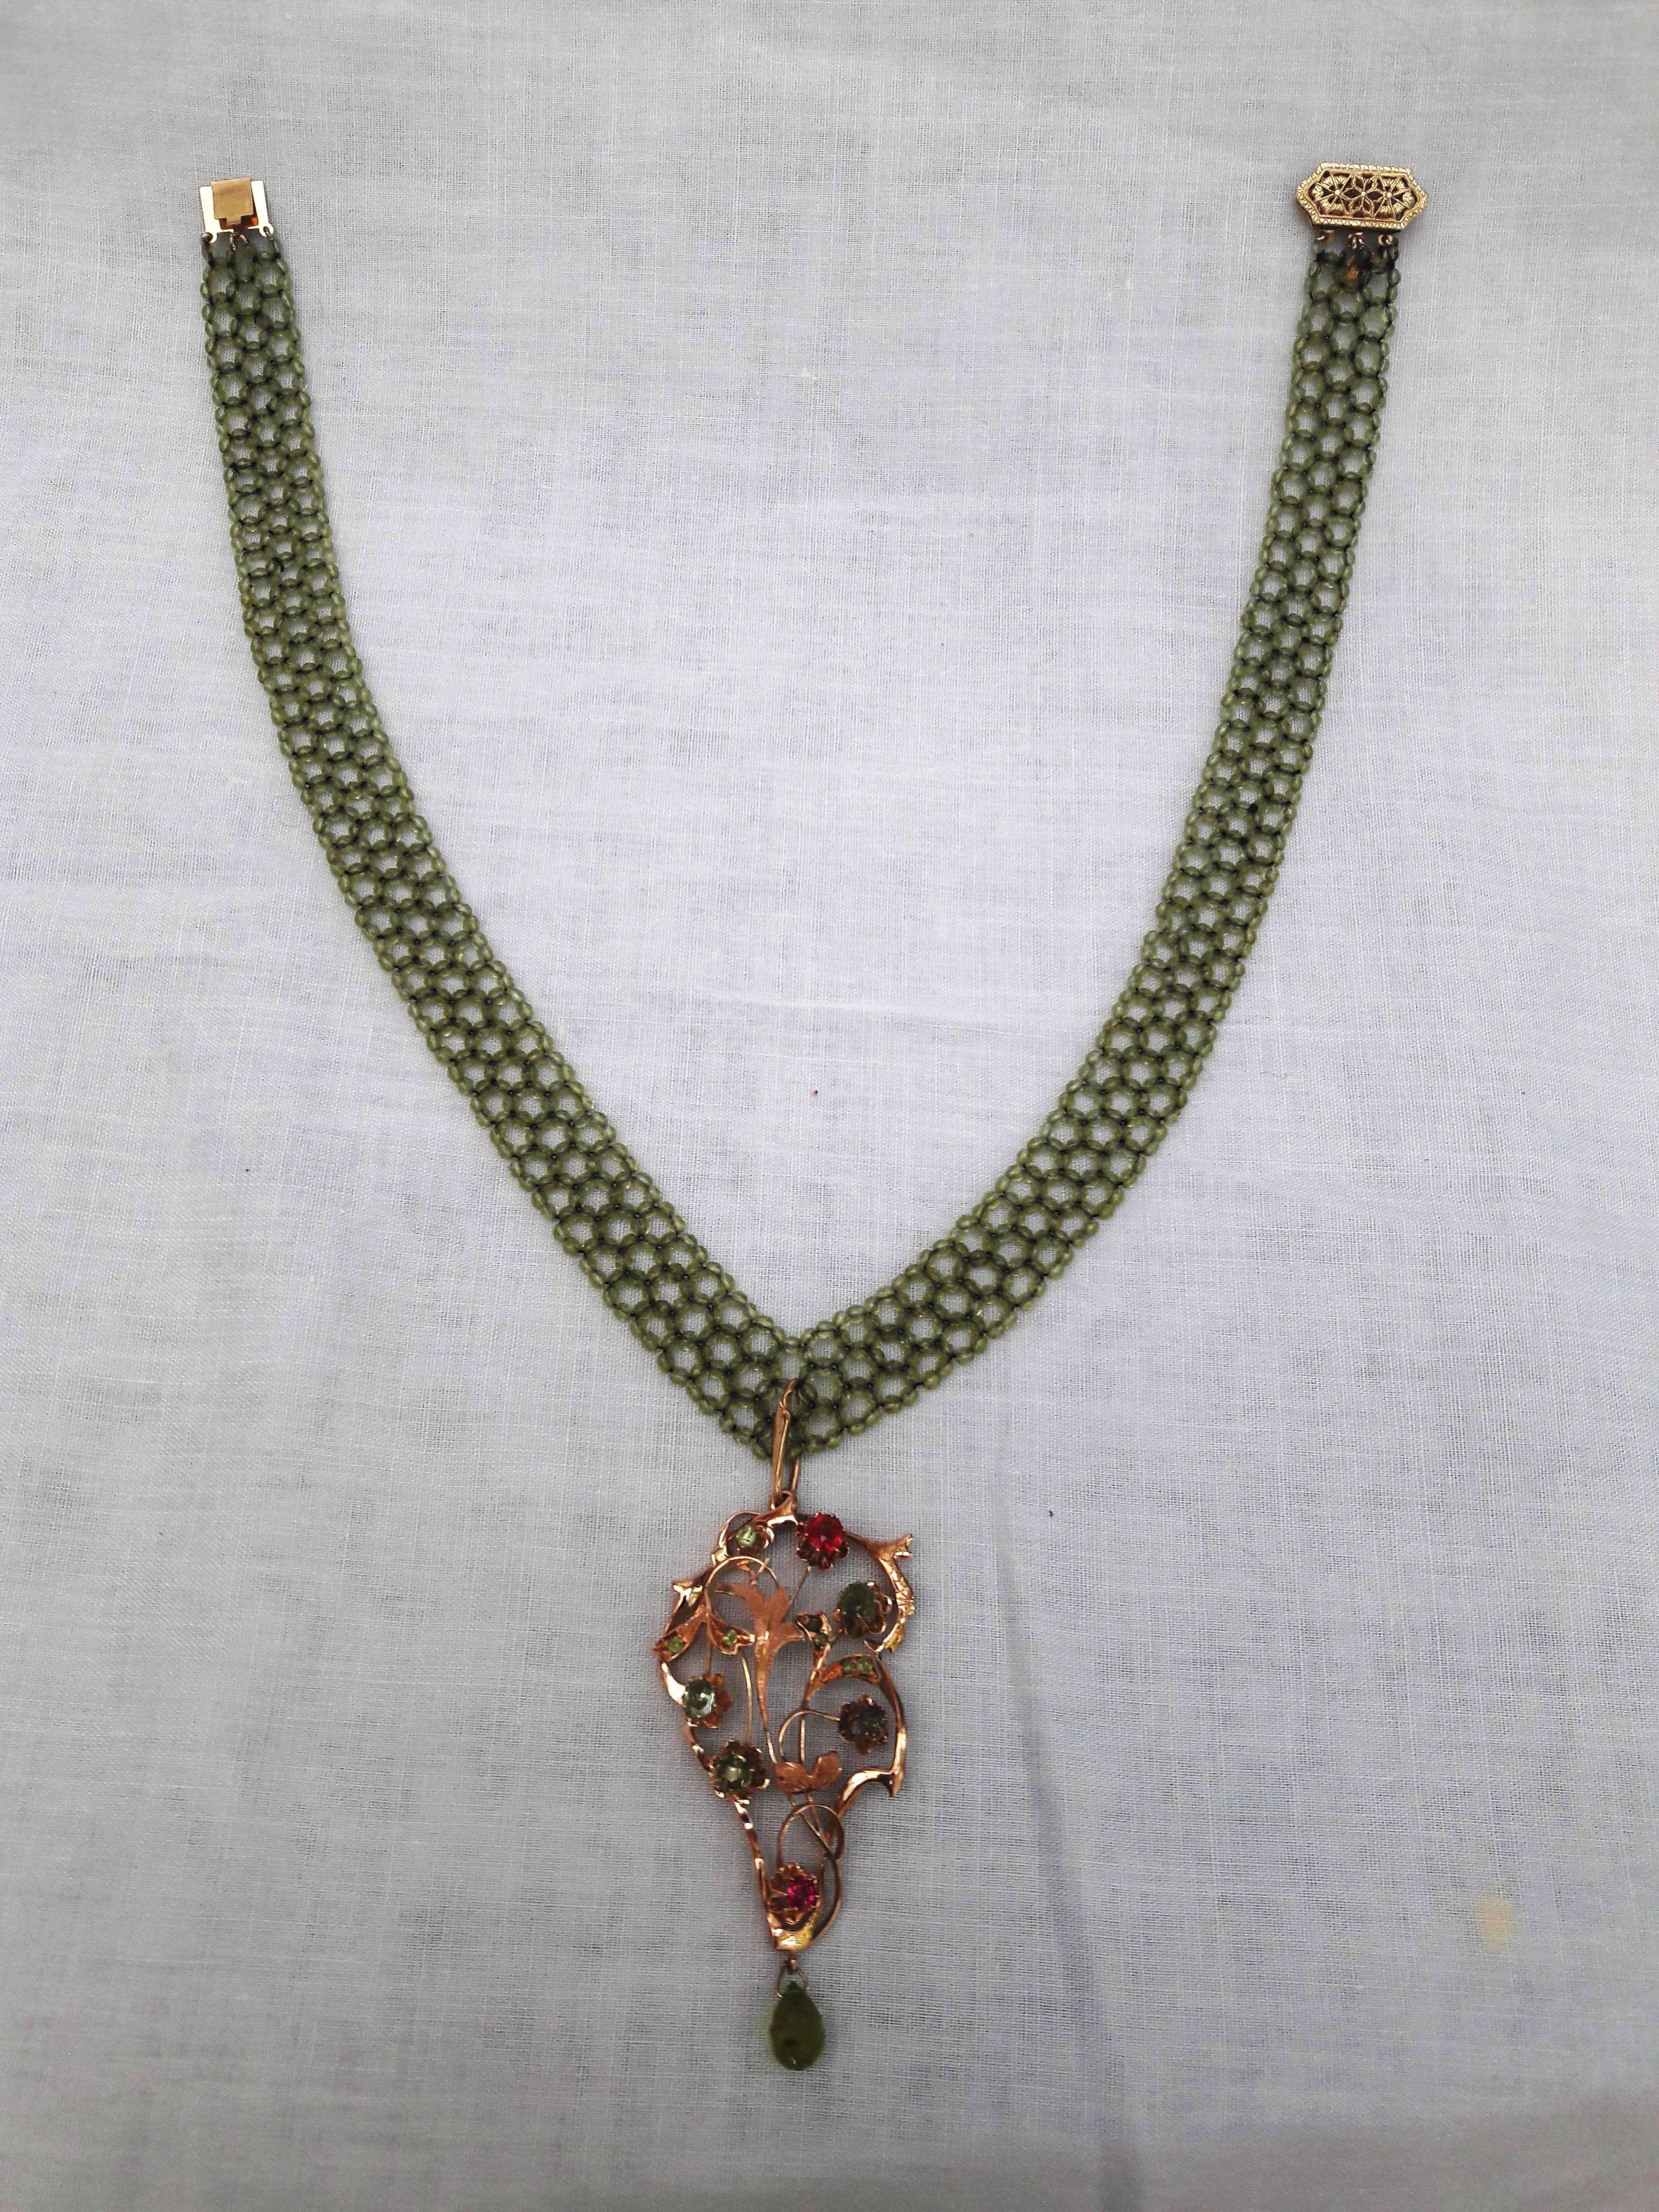 Artist Woven Peridot Bead Necklace with Removable Pendant of Ruby, Peridot and Gold For Sale